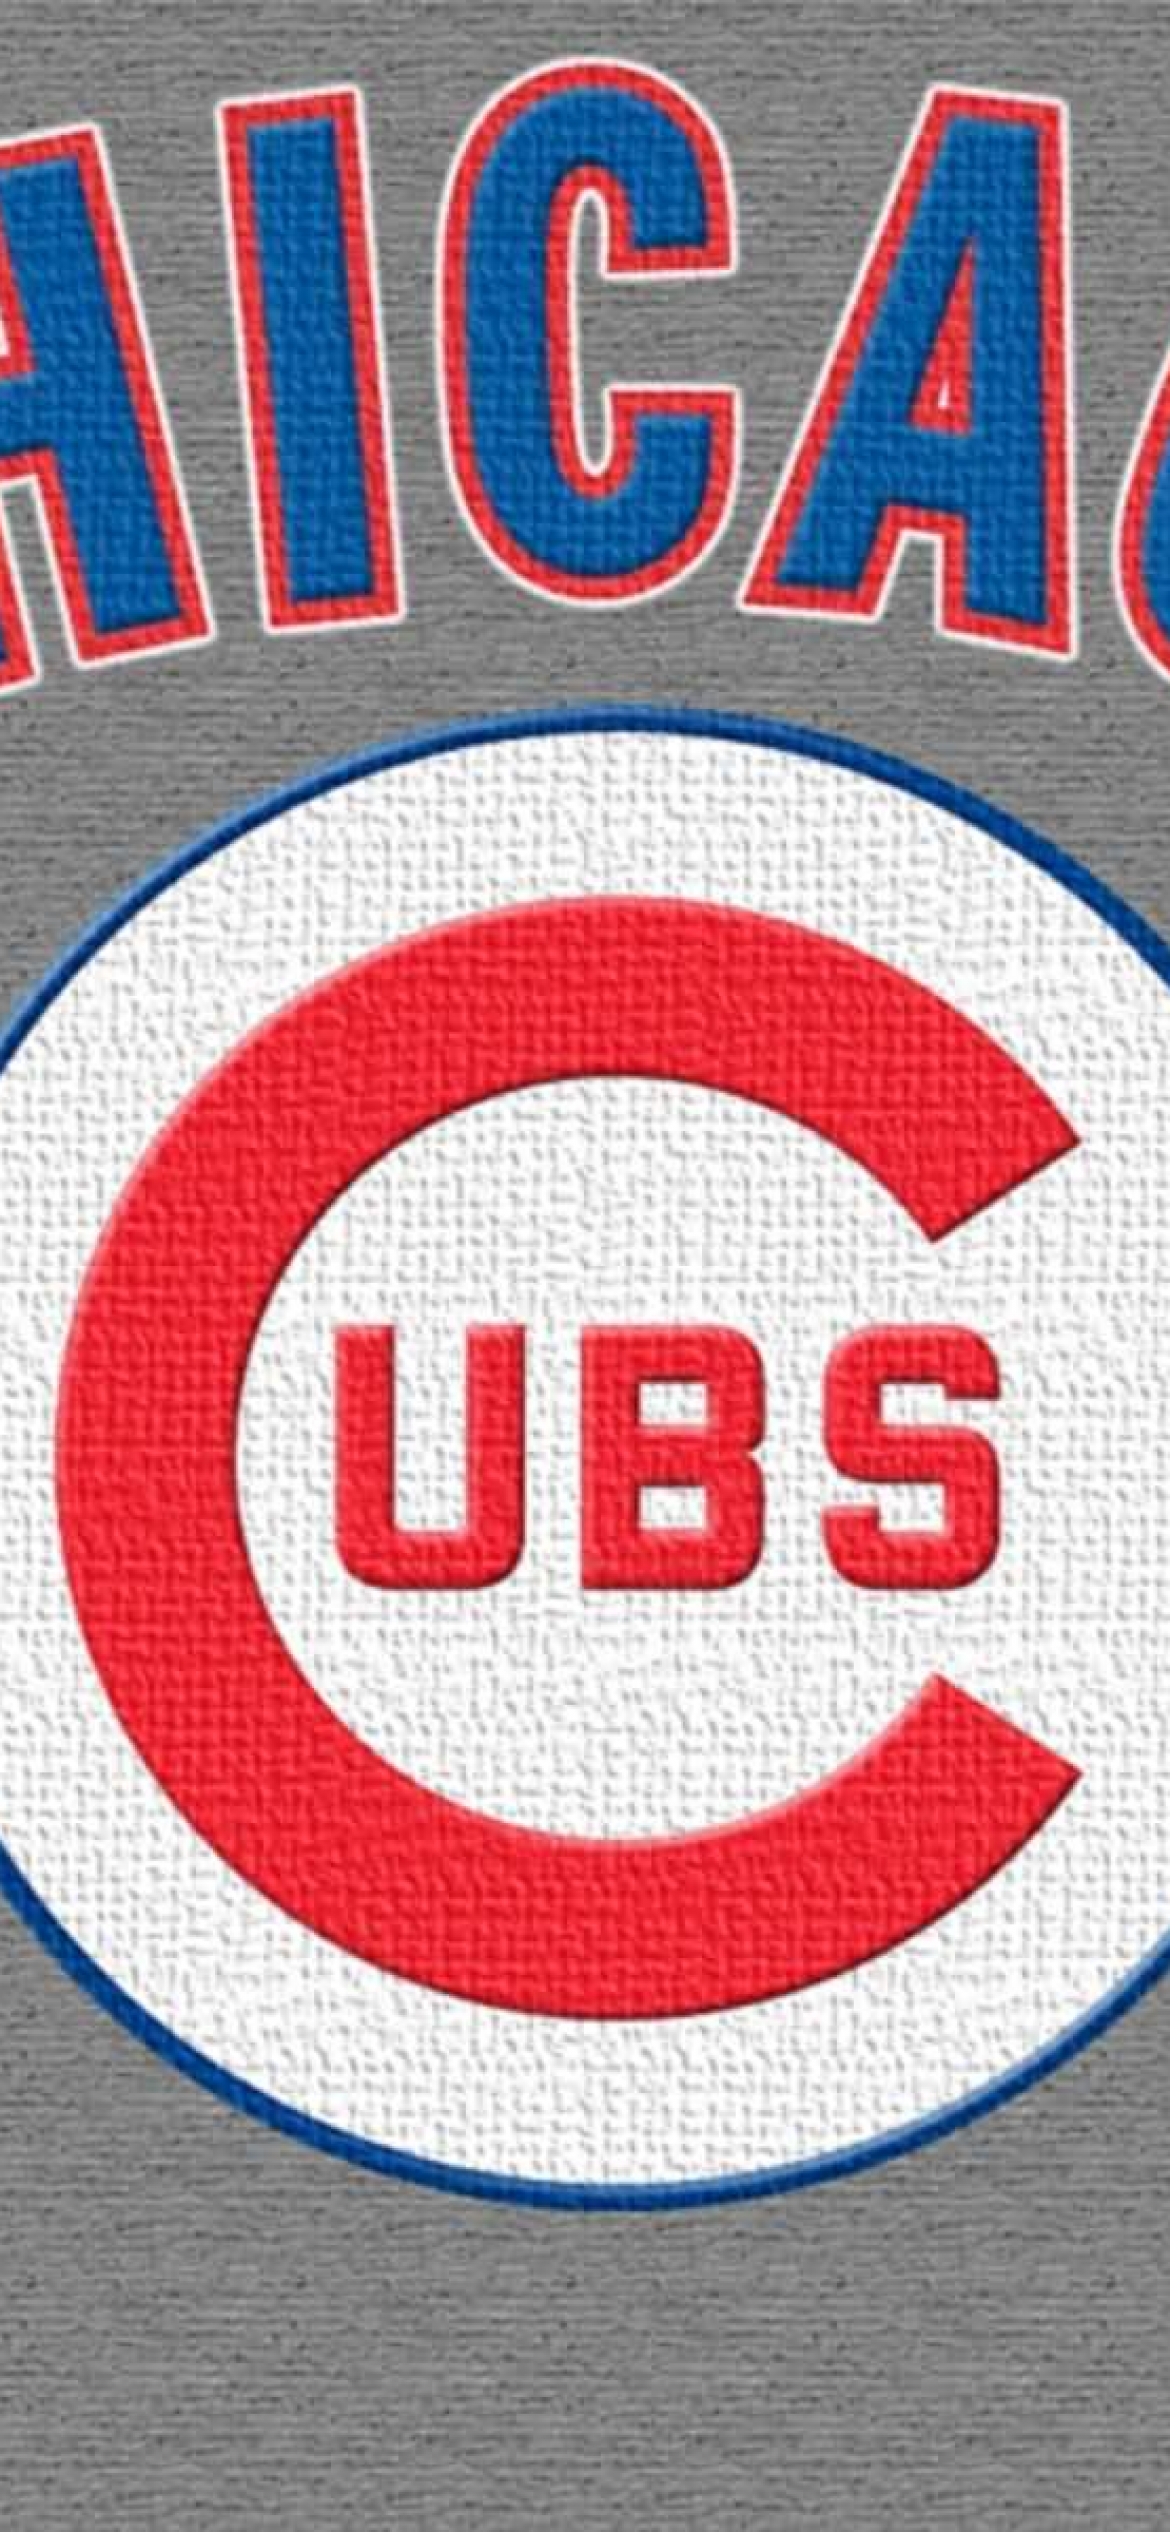 iPhone  iPhone 6 Sports Wallpaper Thread  Page 245  MacRumors Forums  Cubs  wallpaper Chicago cubs wallpaper Chicago cubs